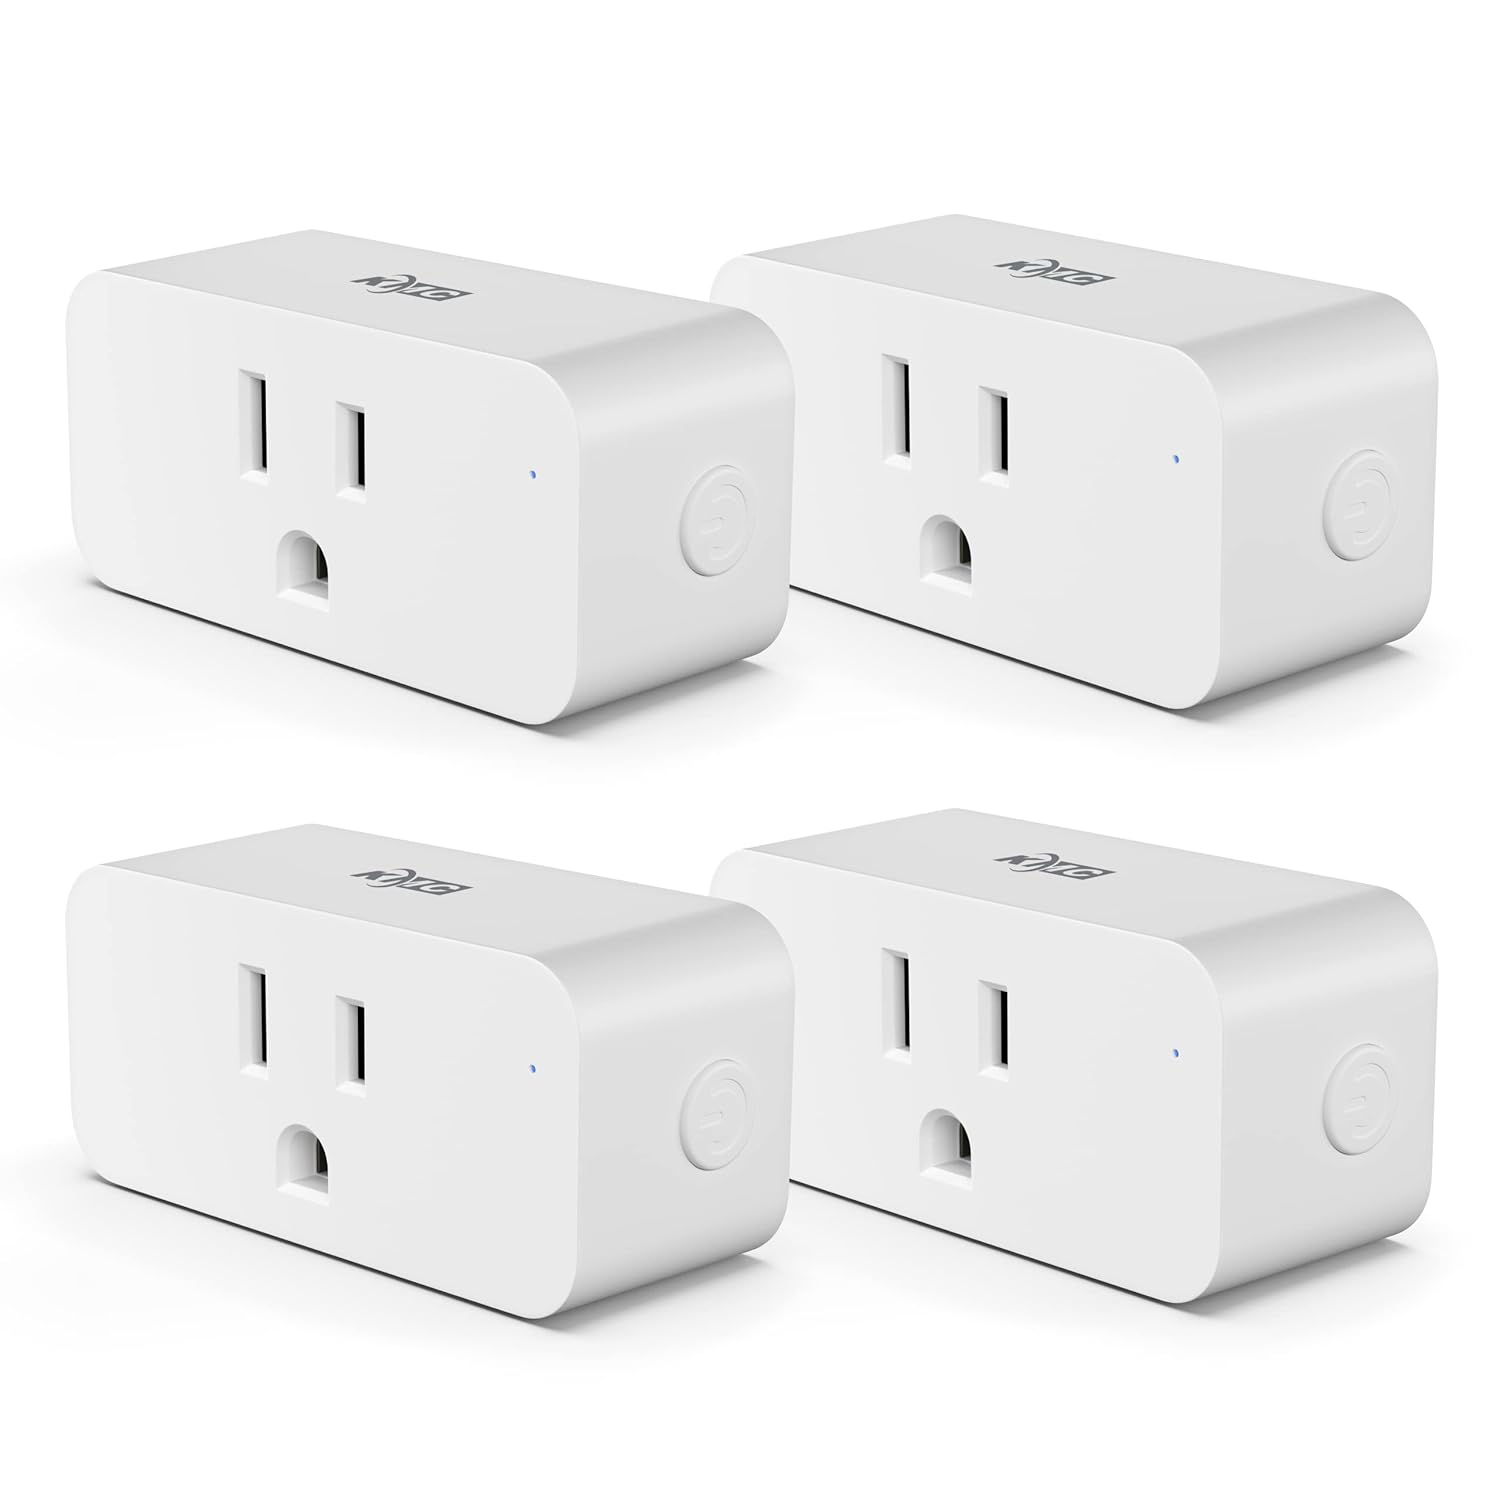 4-Pack KMC Slim Low-Profile Wi-Fi Smart Plugs $10.24 + Free Shipping w/ Prime or on $35+